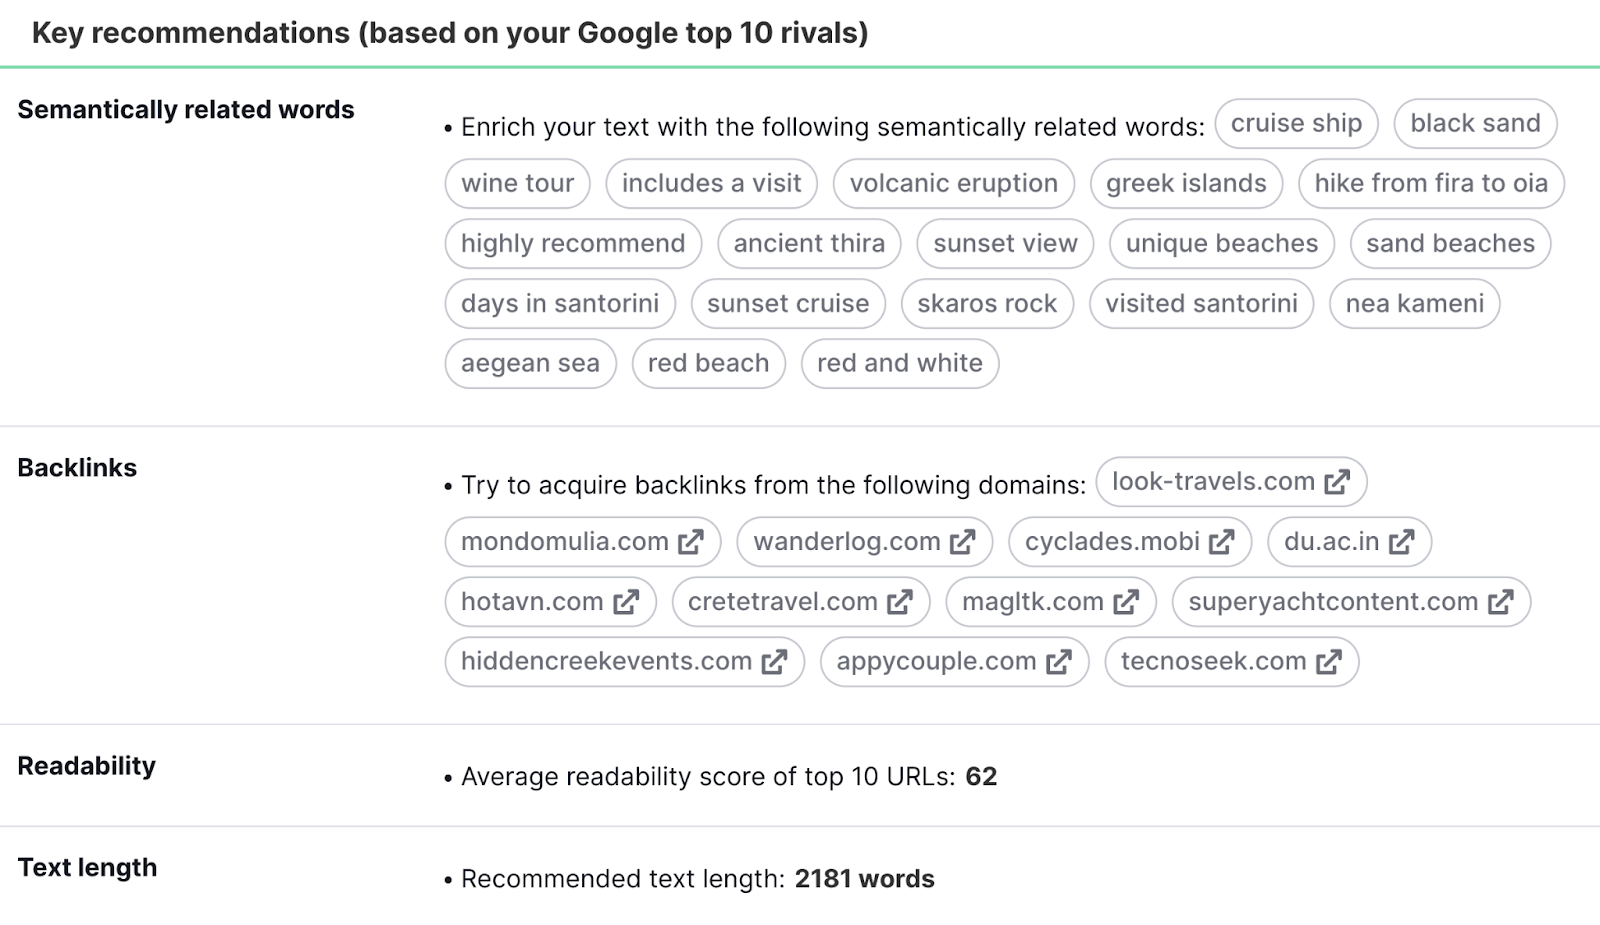 "Key recommendations (based on your Google top 10 rivals)" section of SEO Content Template